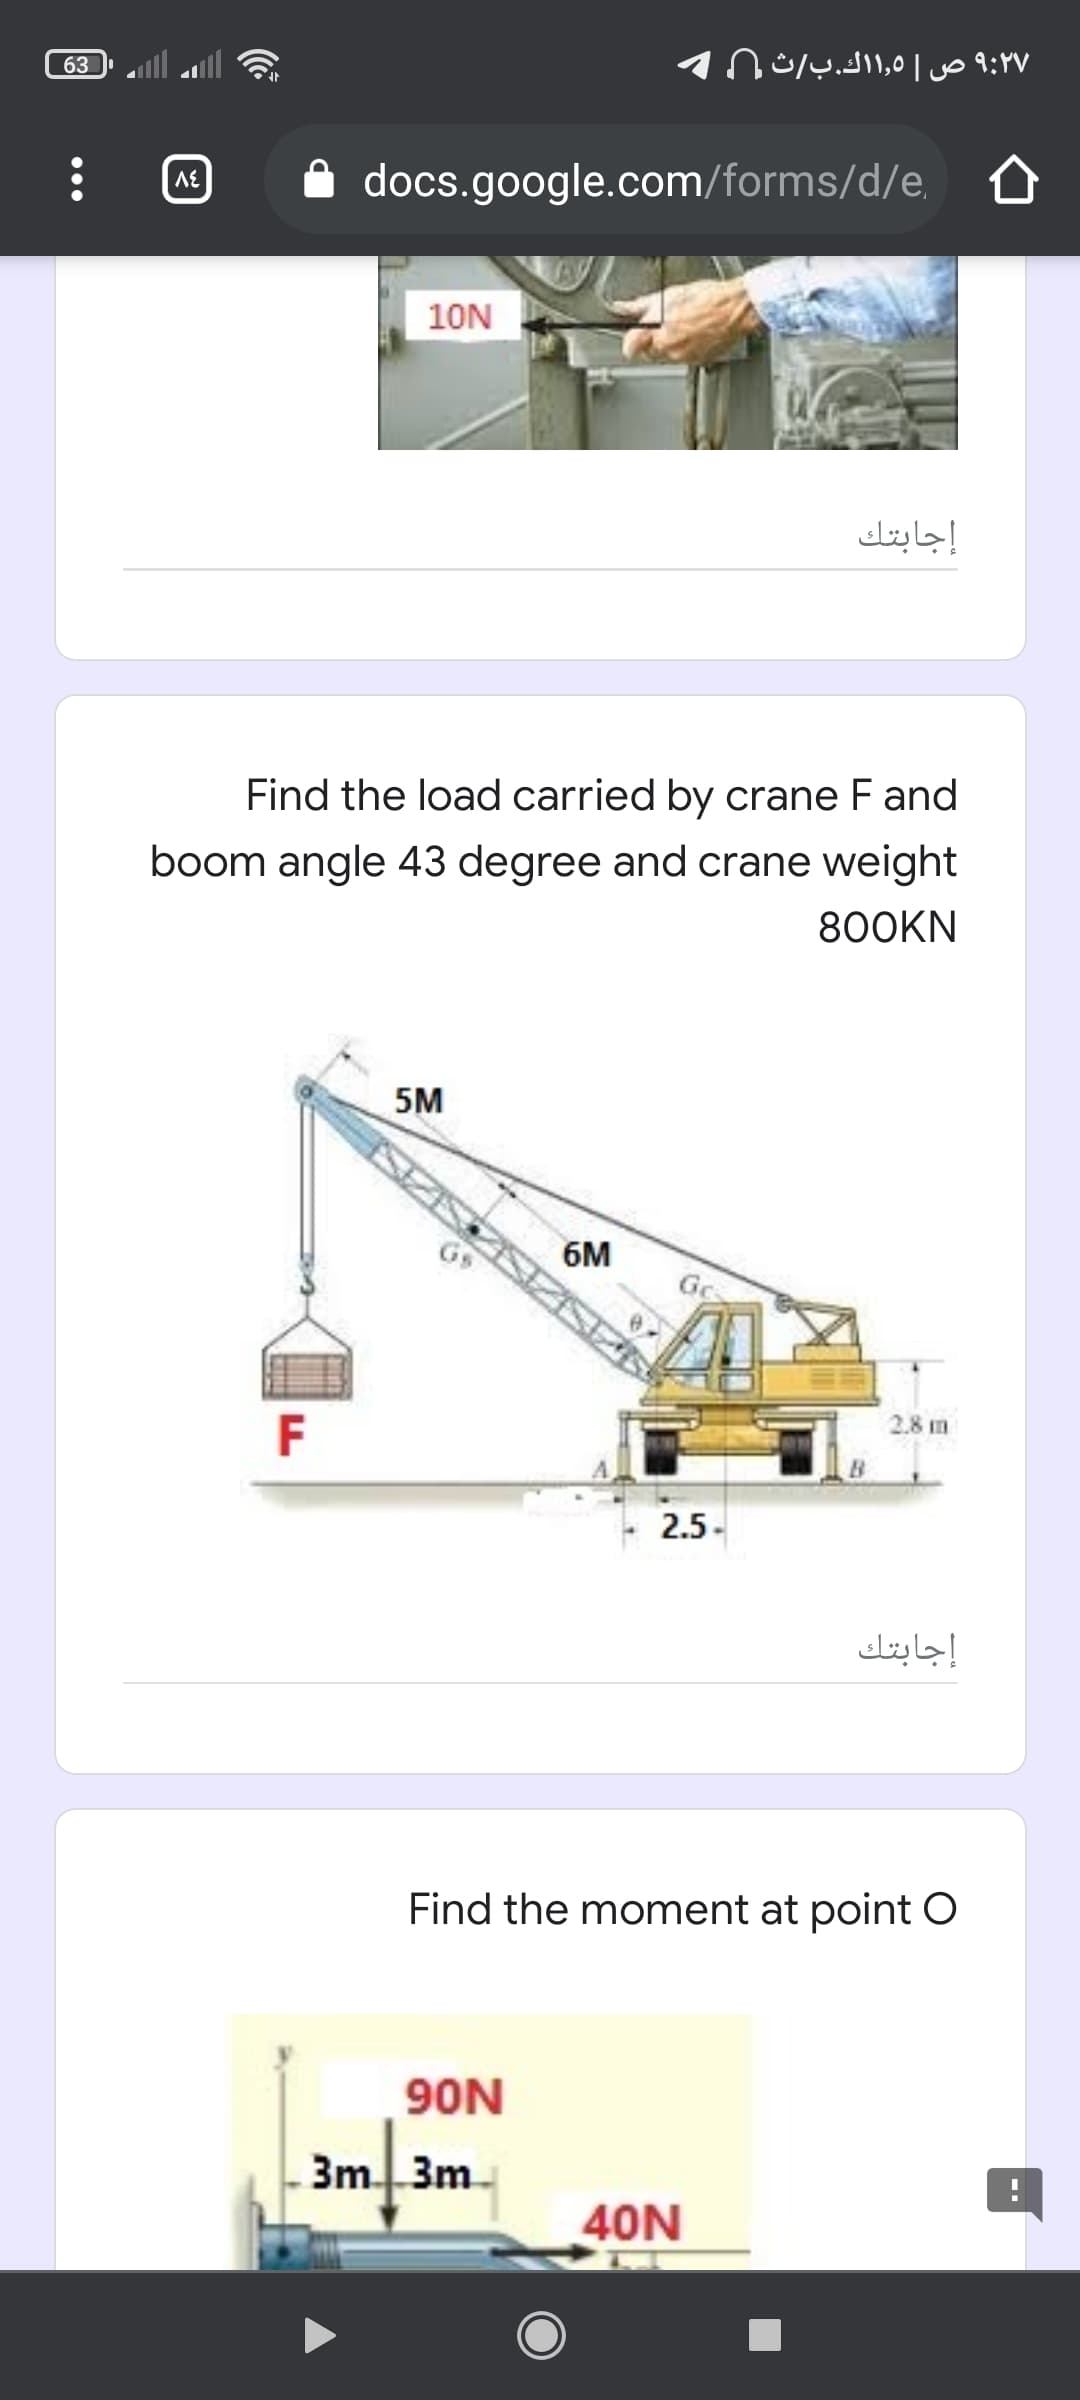 ۹:۲۷ ص ۱,0 ۱ك.بث
63
A docs.google.com/forms/d/e, A
10N
إجابتك
Find the load carried by crane F and
boom angle 43 degree and crane weight
800KN
5M
6M
Gc
2.8 m
F
2.5-
إجابتك
Find the moment at point O
90N
3m 3m
40N
--
